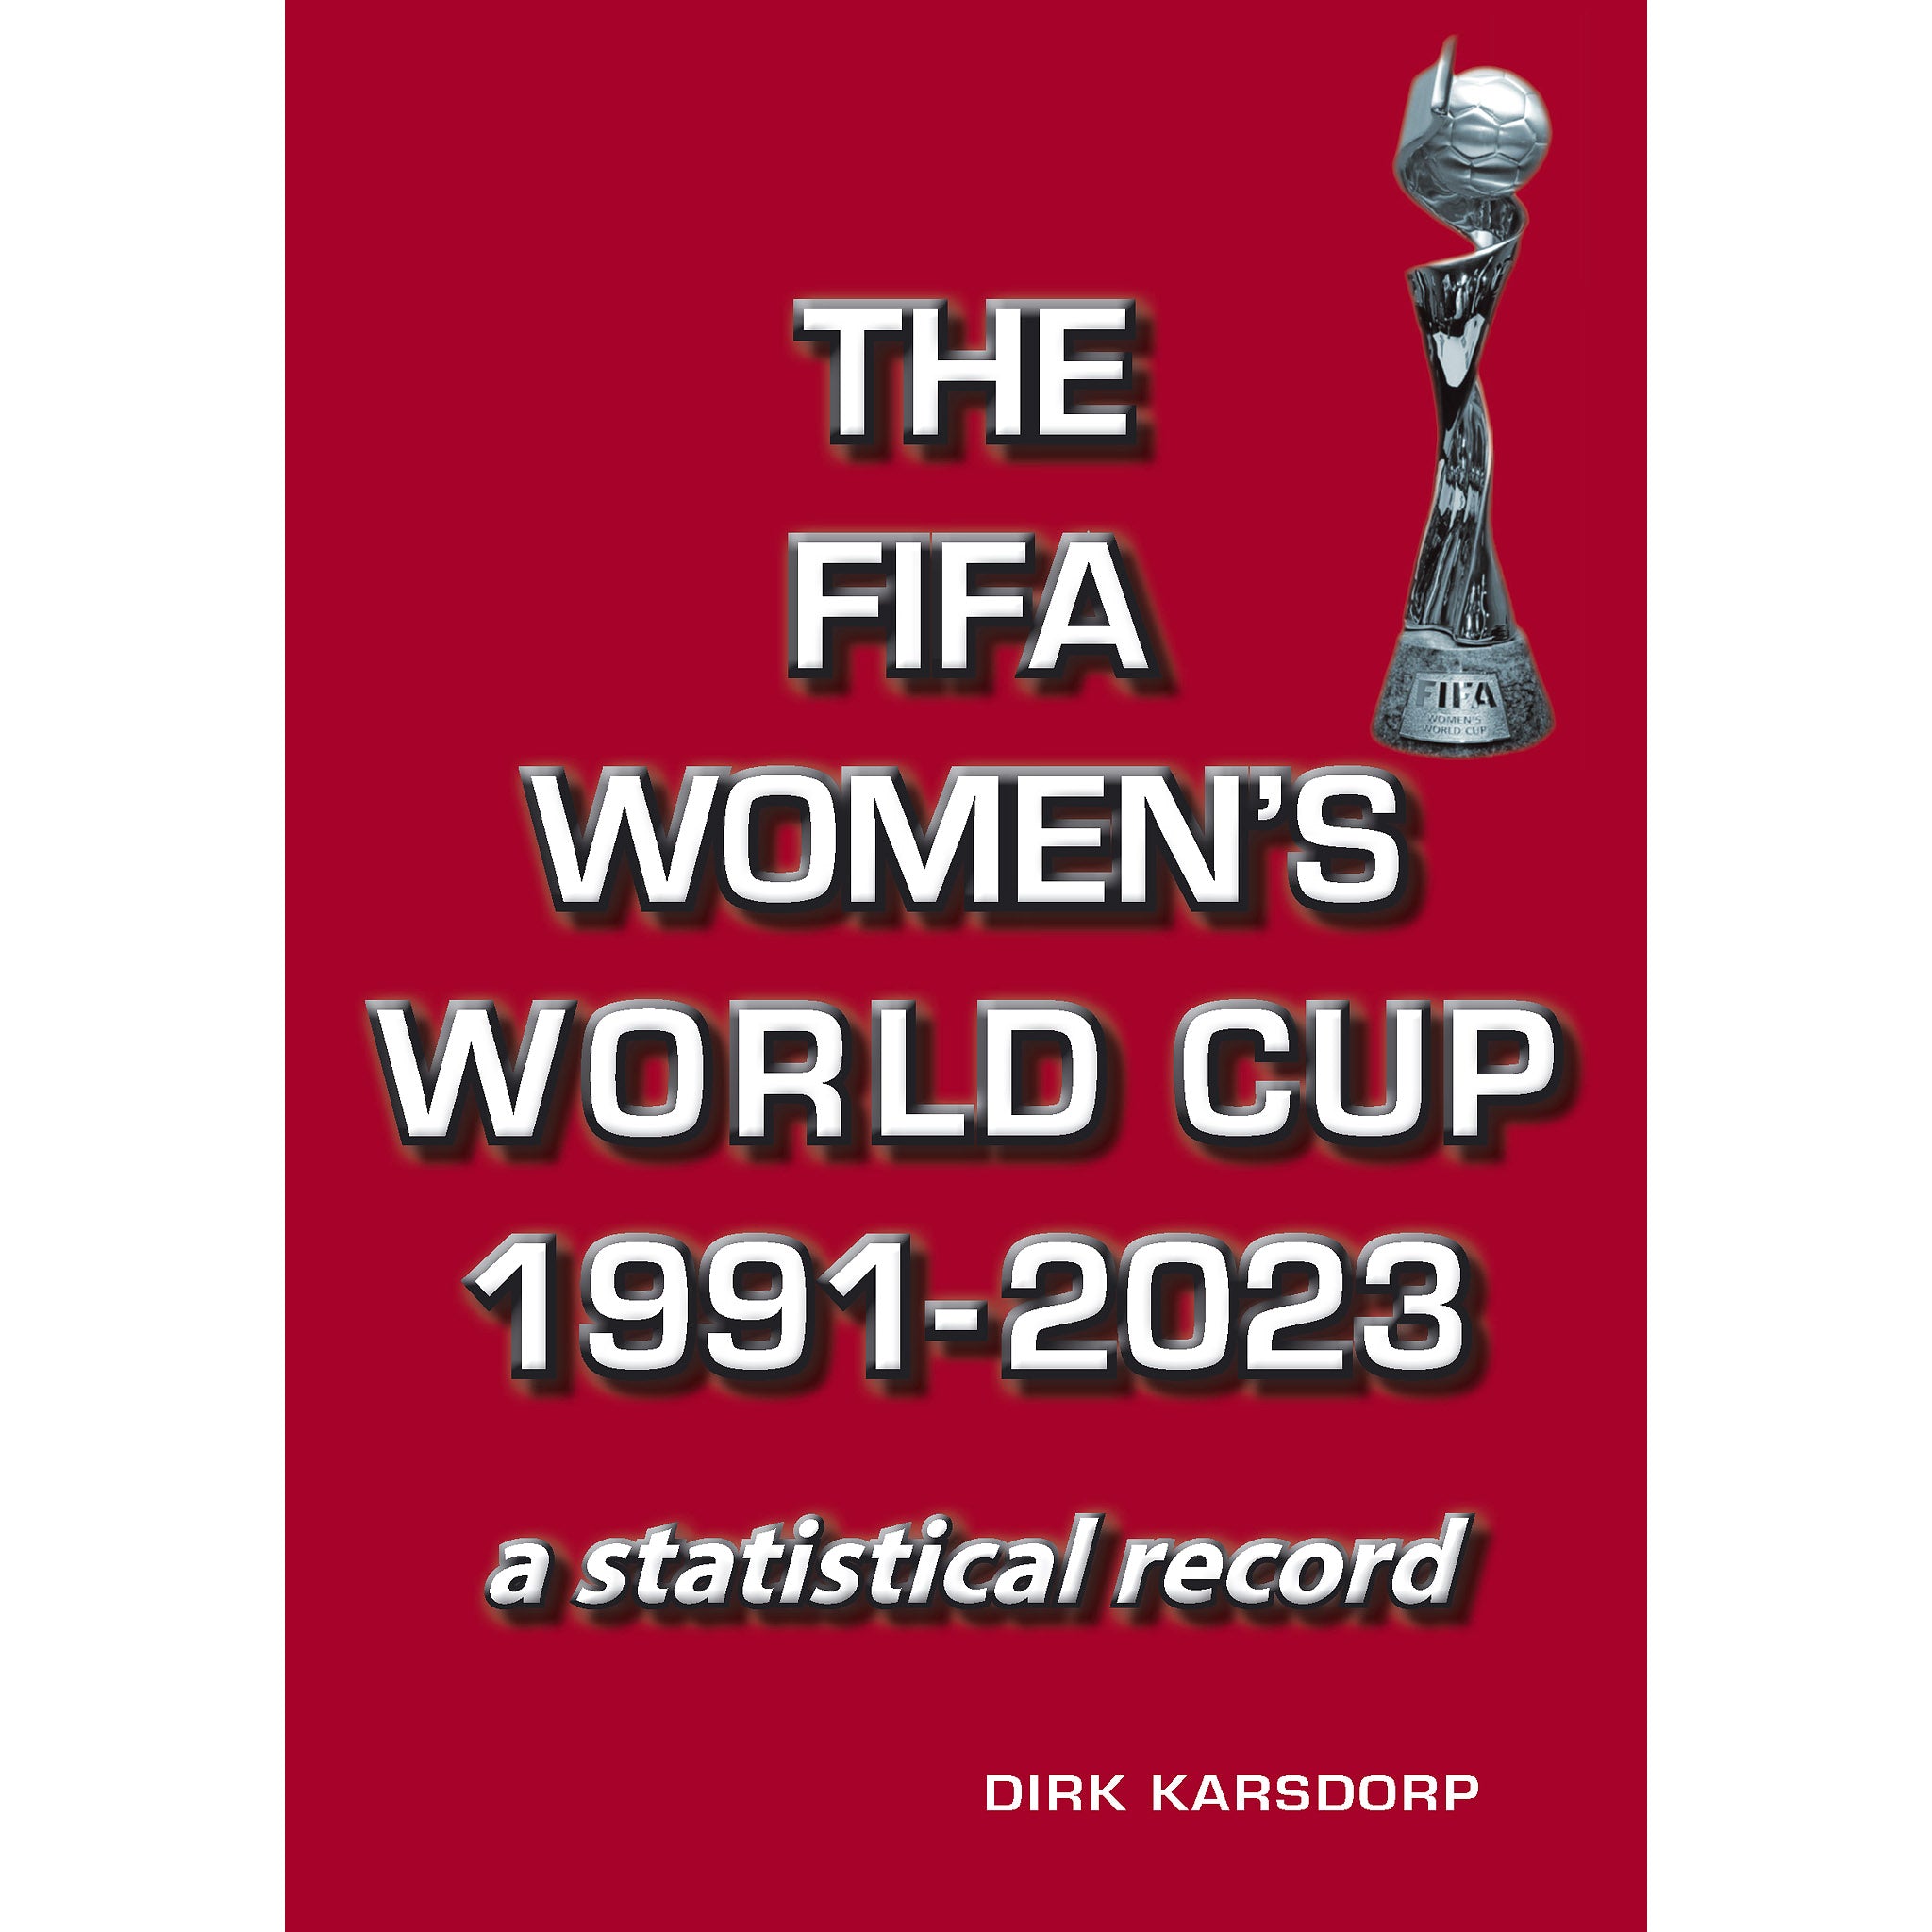 The FIFA Women's World Cup 1991-2023 – a statistical record